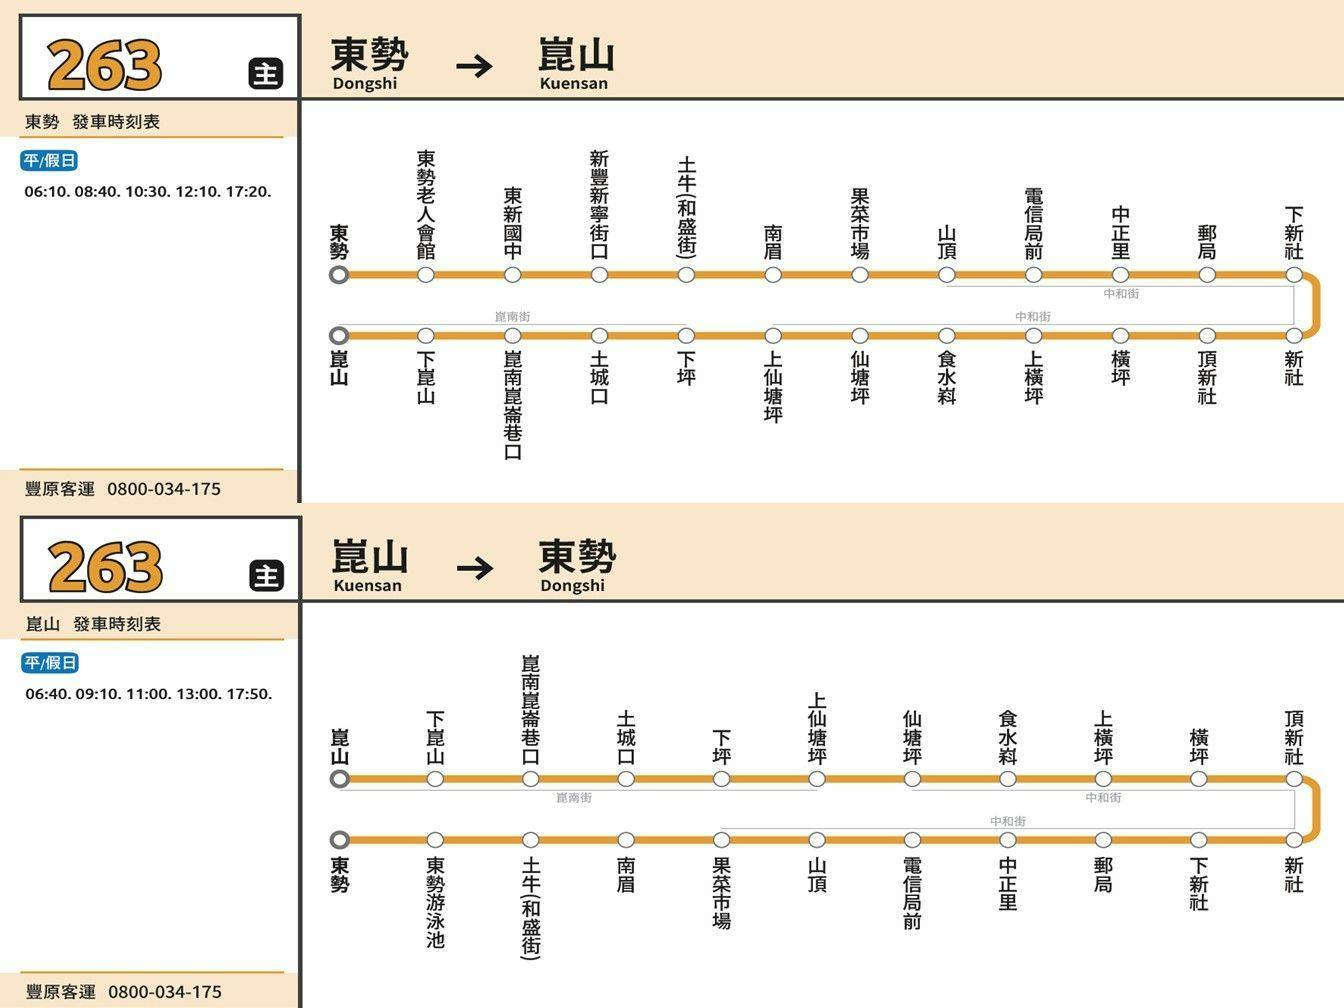 263Route Map-台中 Bus